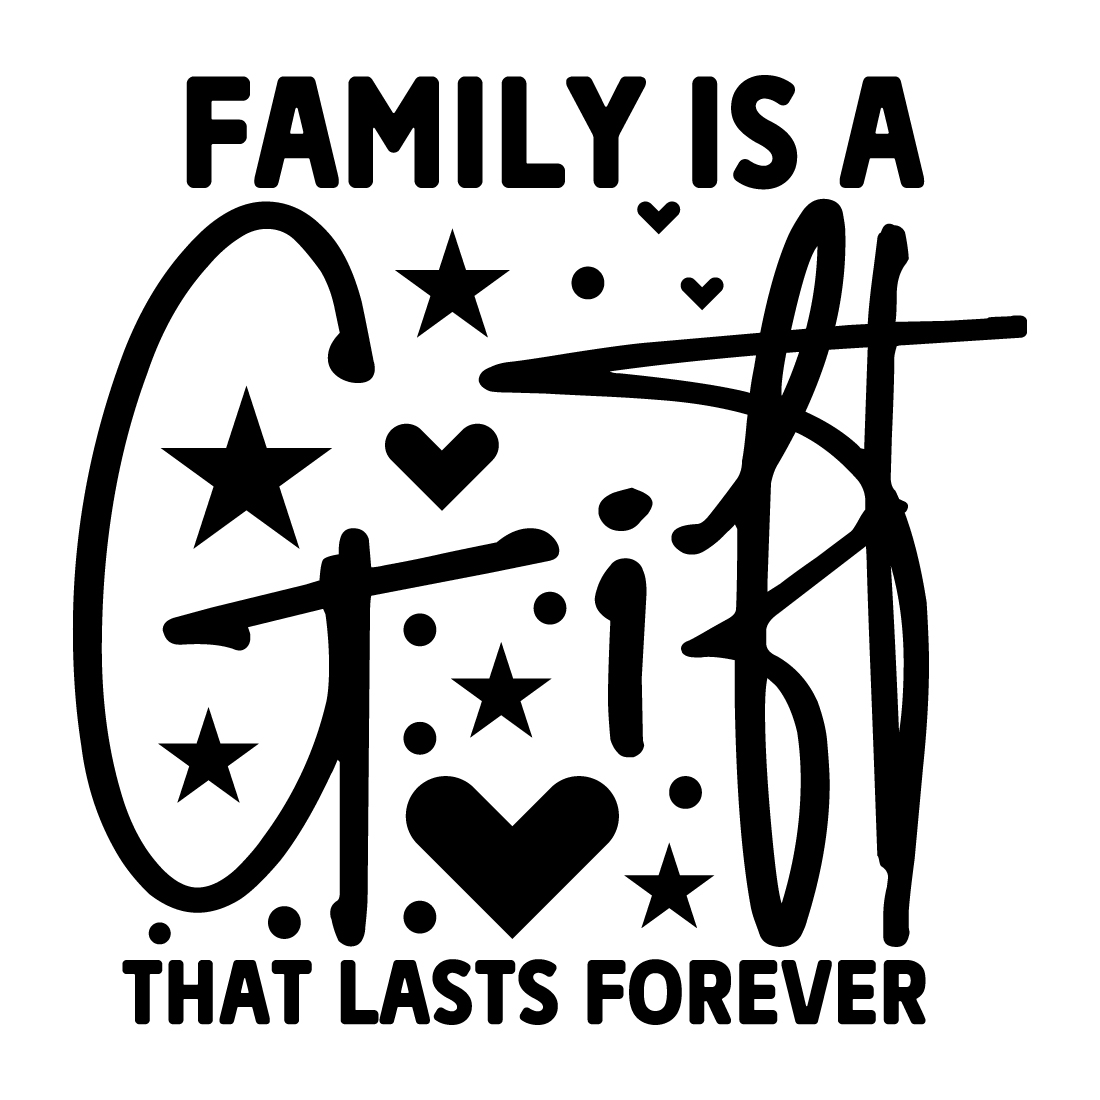 Family is a gift that lasts forever preview image.